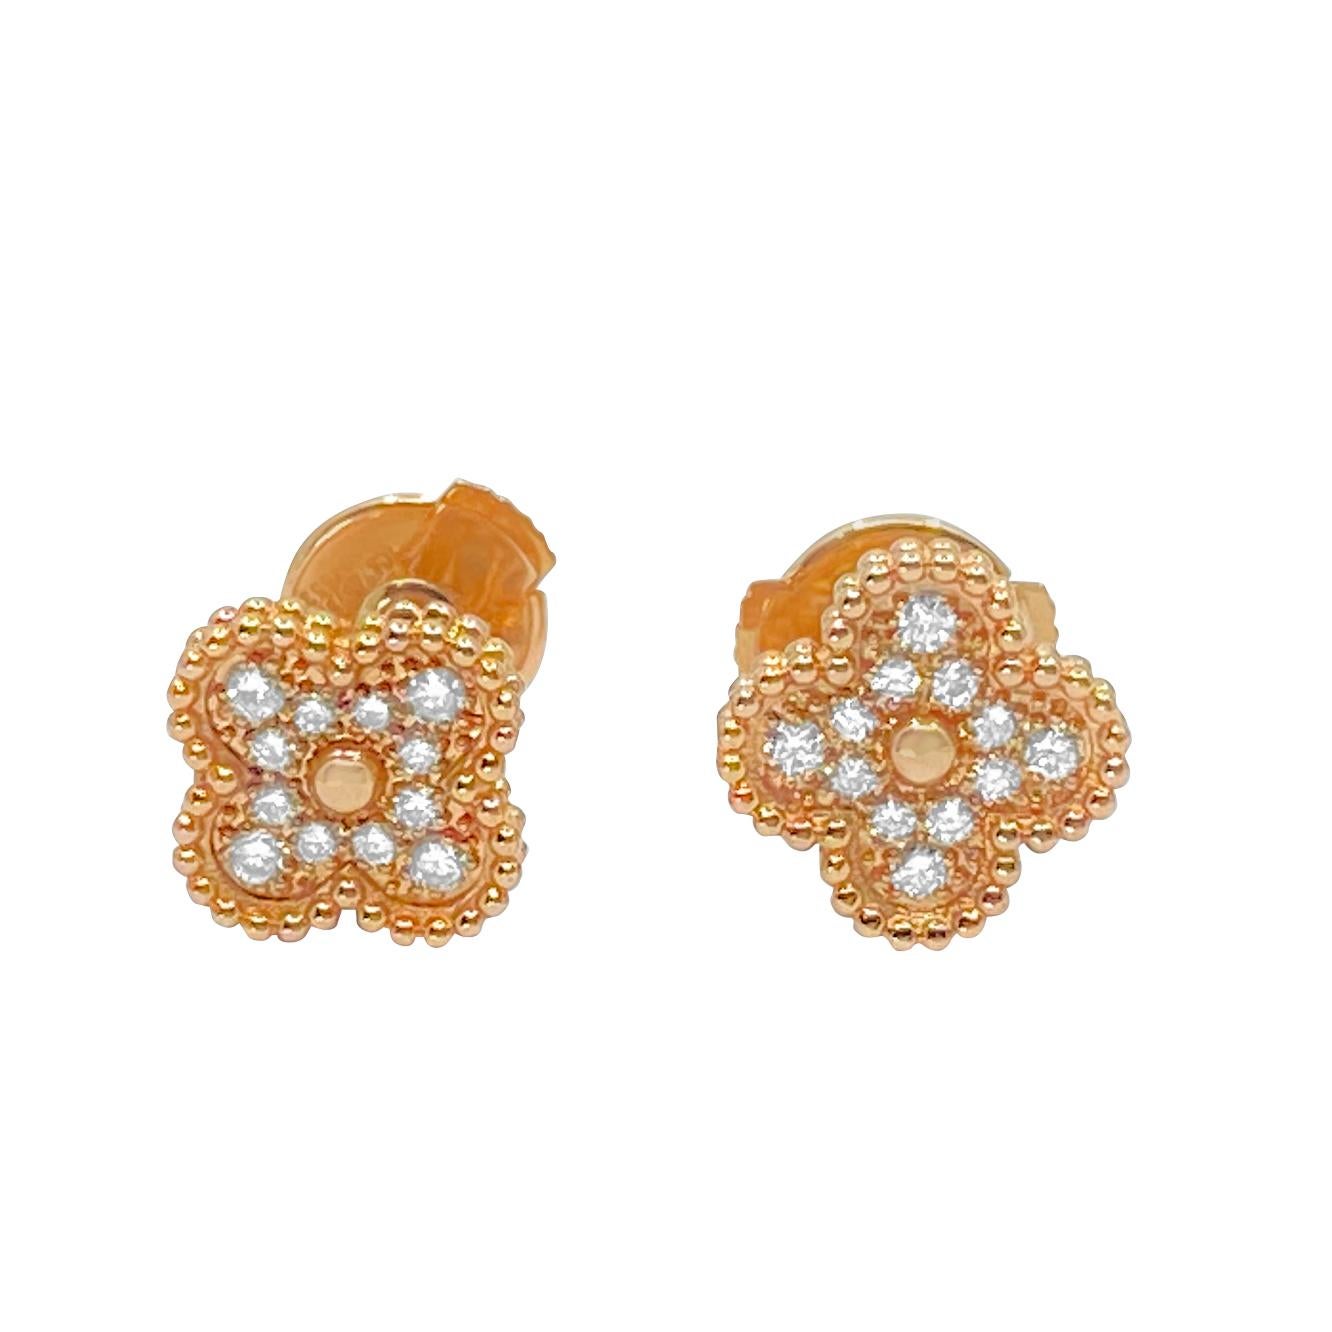 Metal: 18k rose gold. Diamonds: 0.20 cwt. Round brilliant cut, 100% natural earth mined diamonds. Brand: Van Cleef Arpels. The Sweet Alhambra jewelry creations by Van Cleef & Arpels have featured delightful lucky motifs in miniature form since 2007.